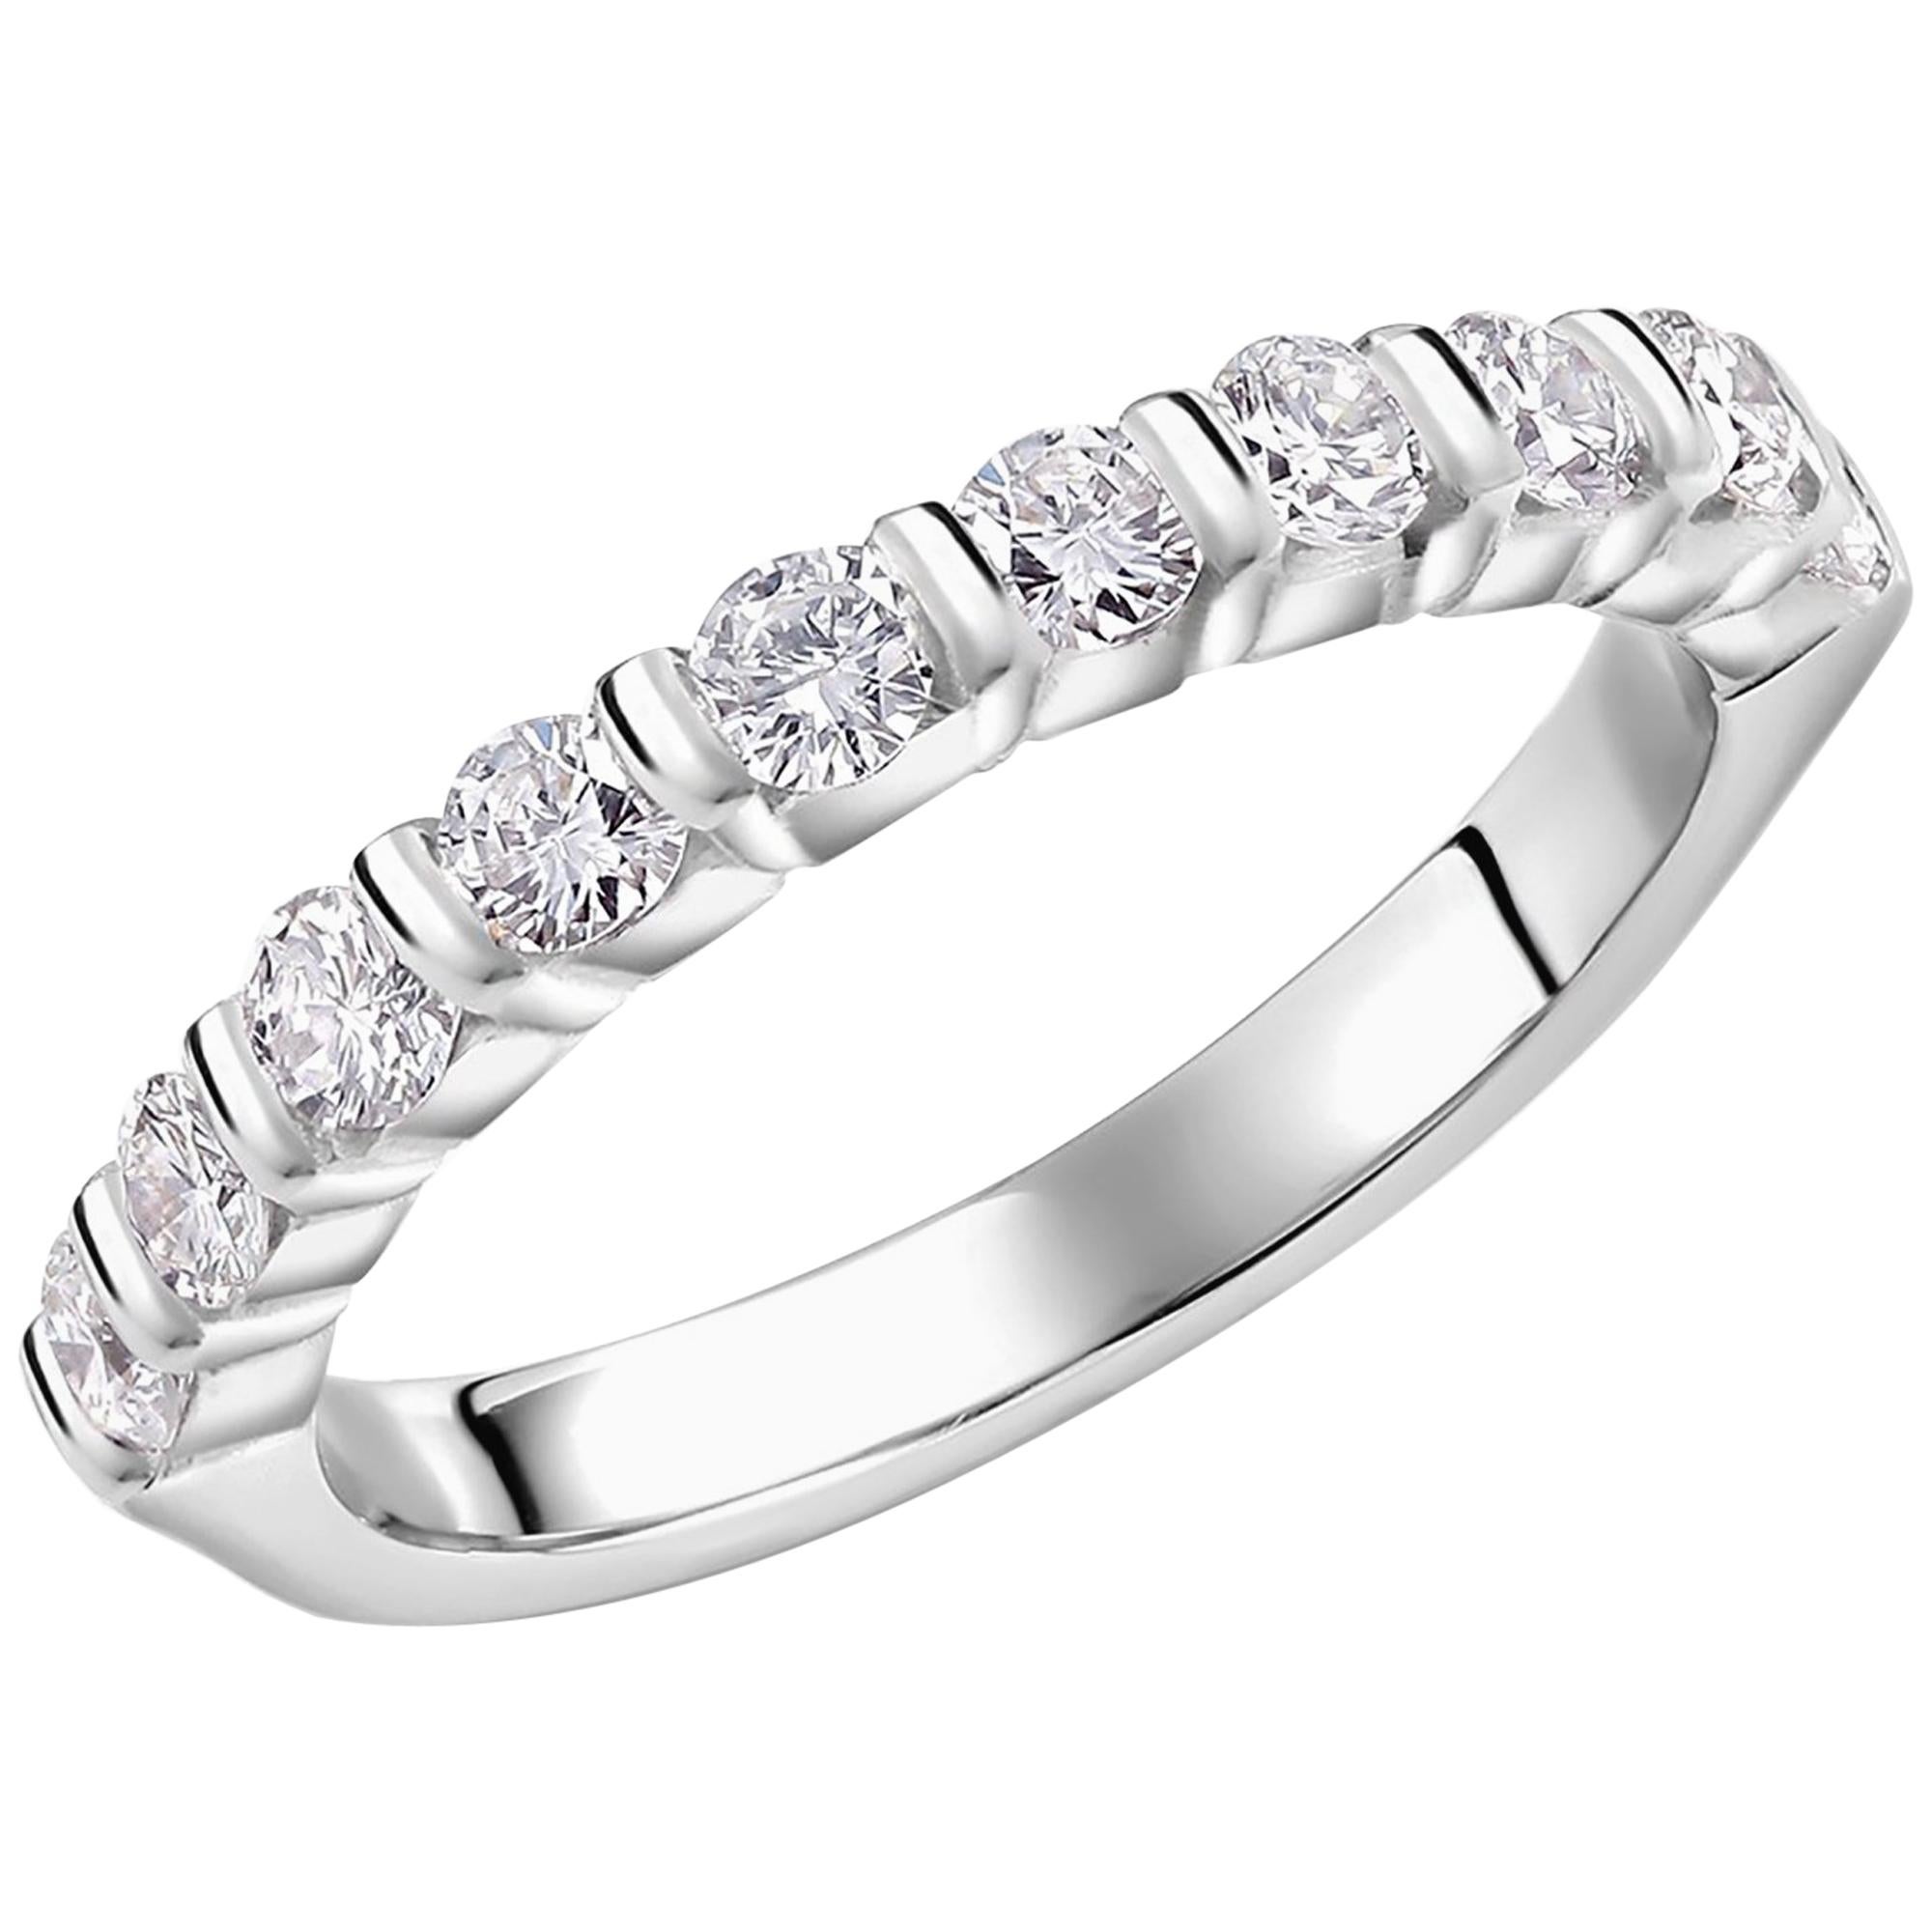 Platinum bar-set diamond partial wedding or anniversary ring 
Diamond weighing 0.60 carat
Ten stone band
Diamond quality G VS
New Ring
Ring size 6 In Stock
The ring can be resized
Handmade in the USA 

